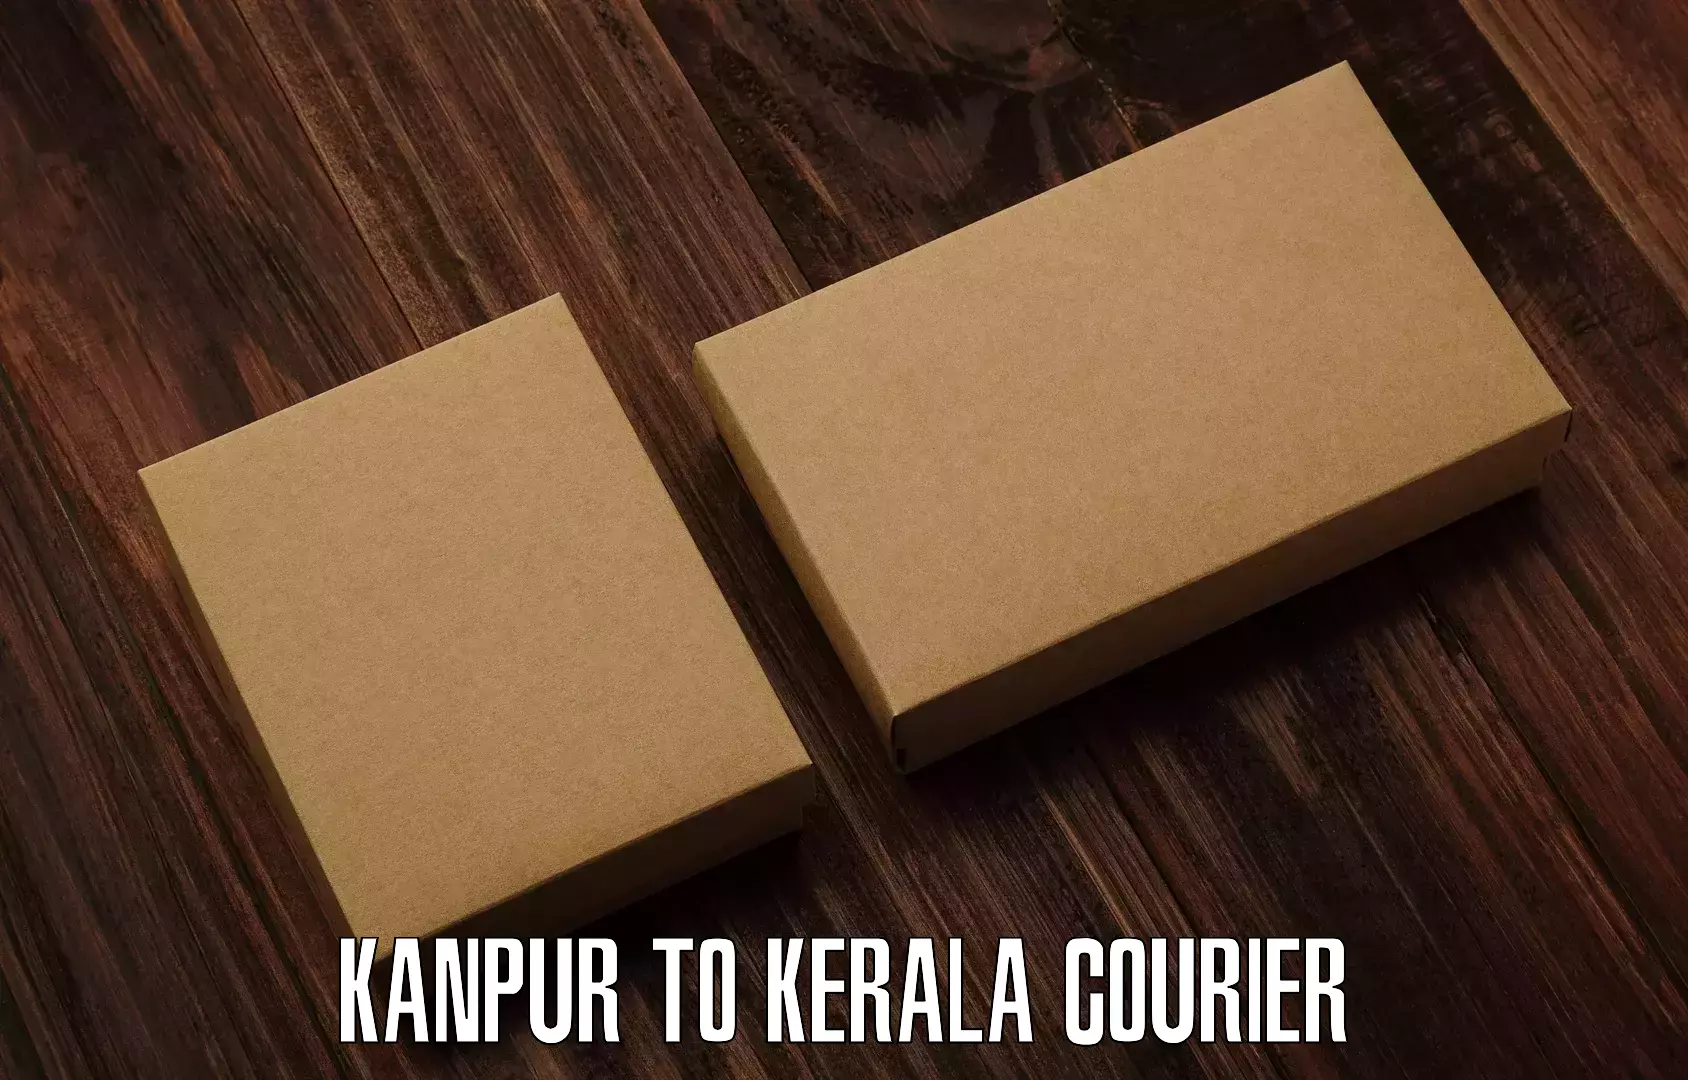 State-of-the-art courier technology Kanpur to Cochin Port Kochi